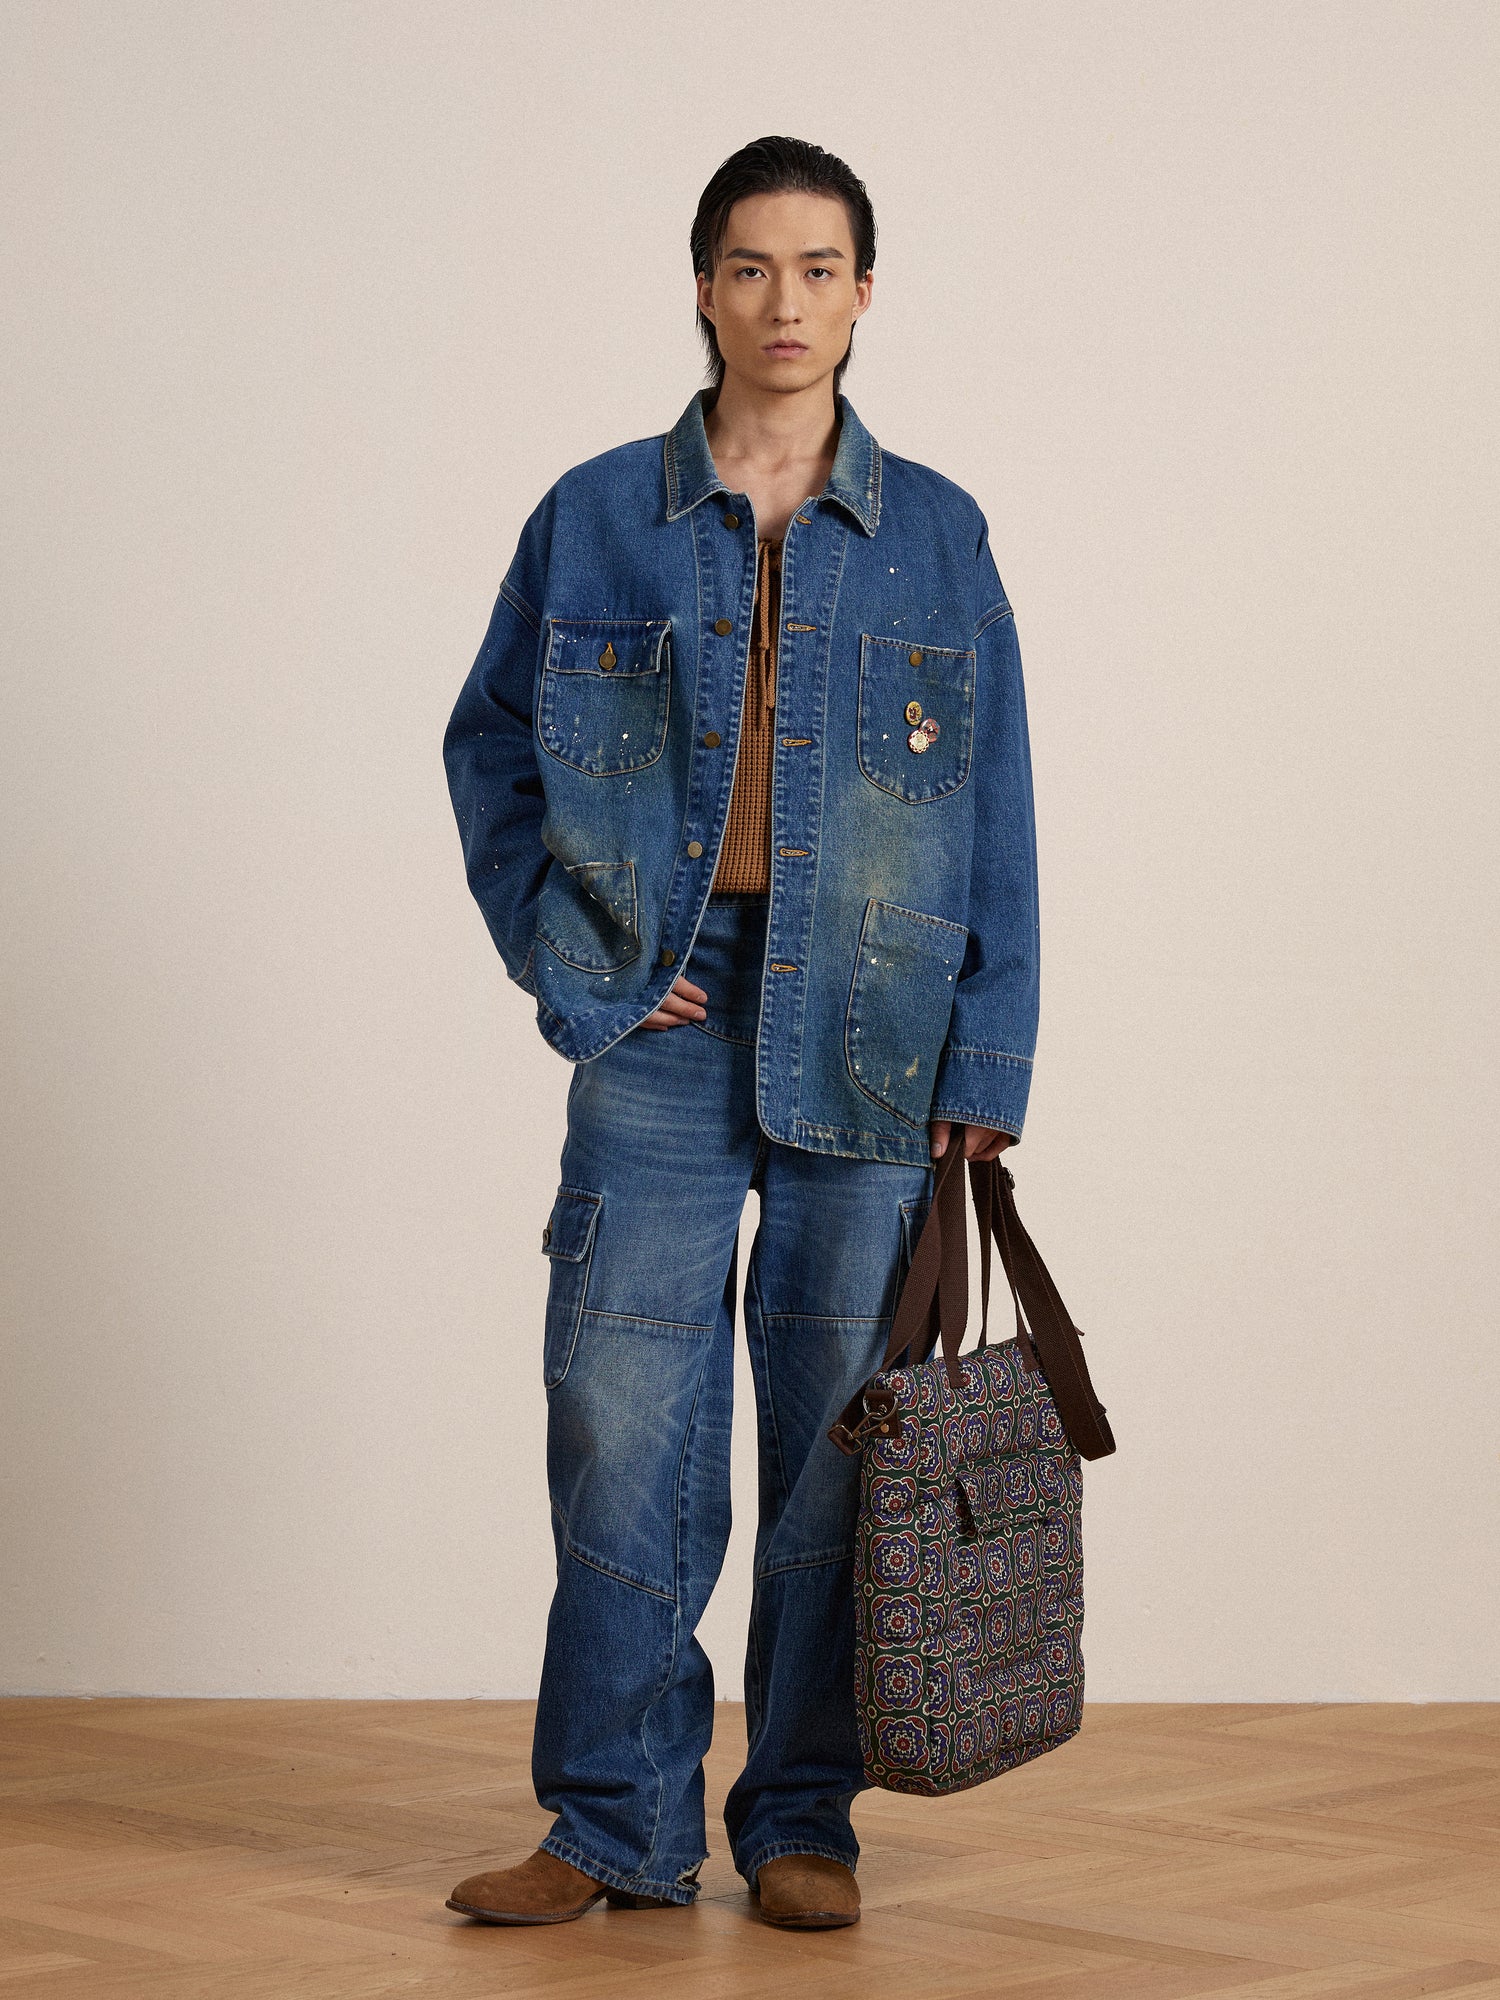 A Kavir Denim Painter Jacket-clad artist in a Found jacket and jeans holding a bag.